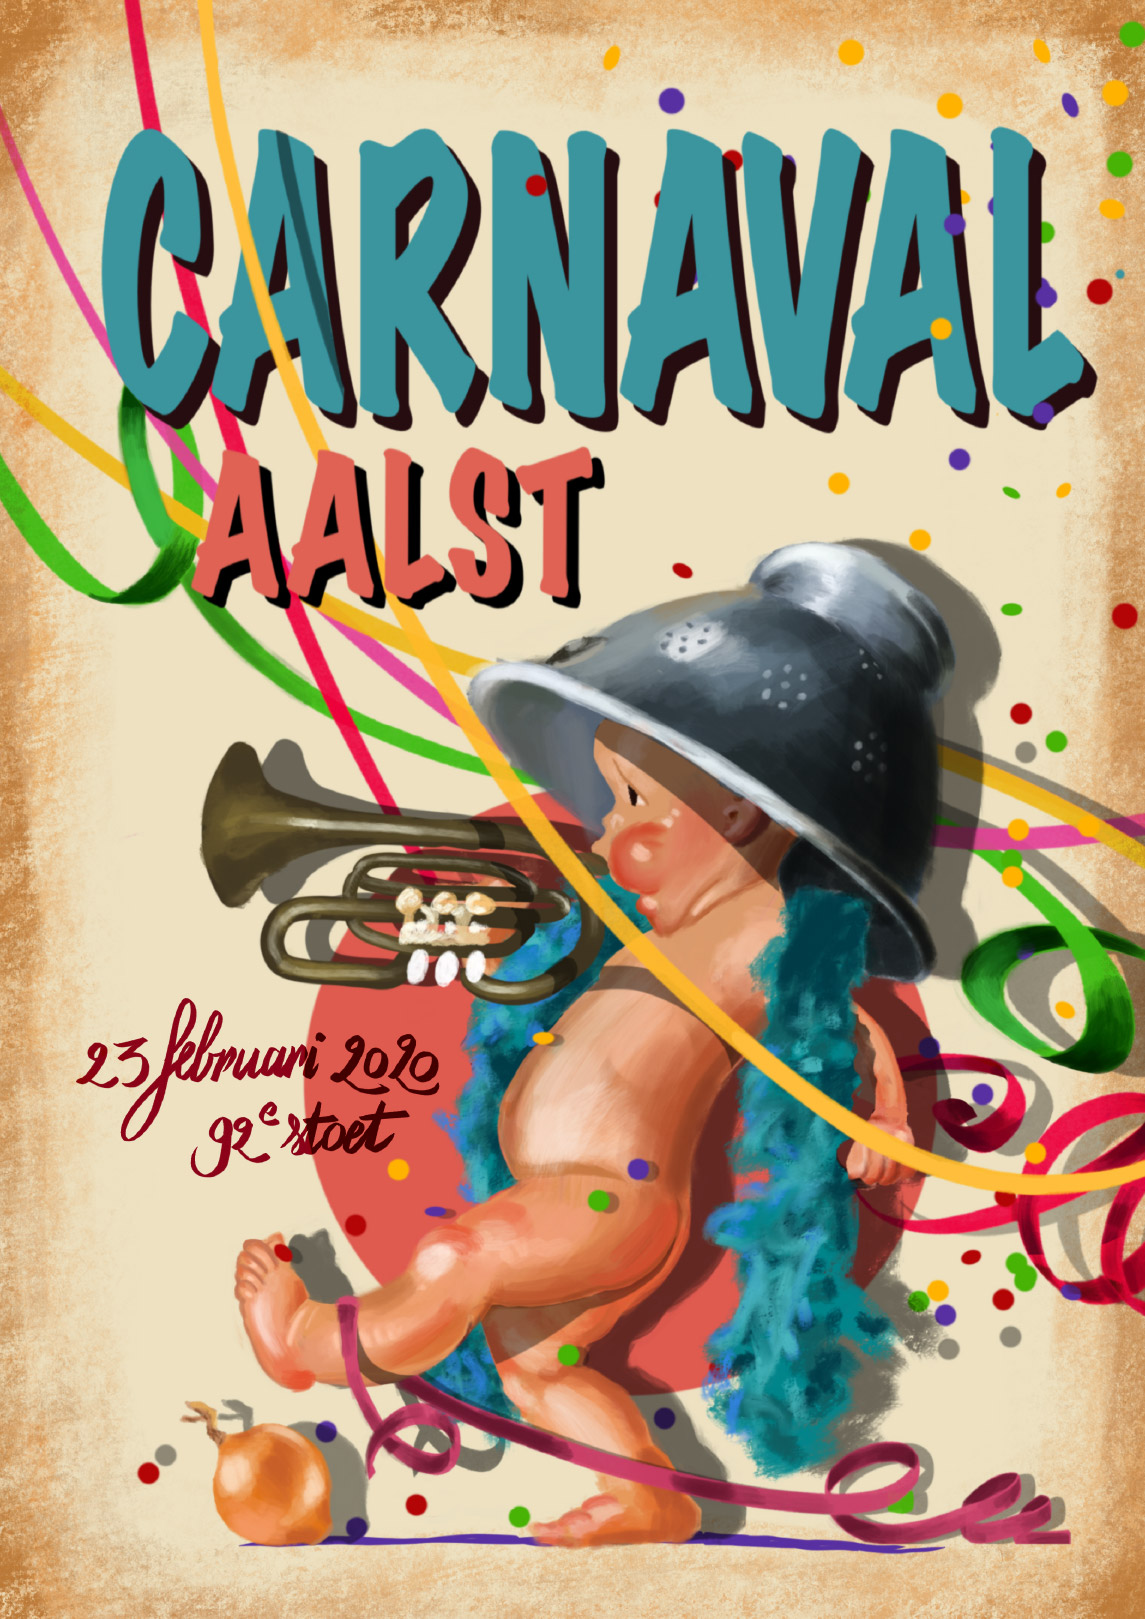 The Making Of the Carnaval of Aaslt / Alost 2020